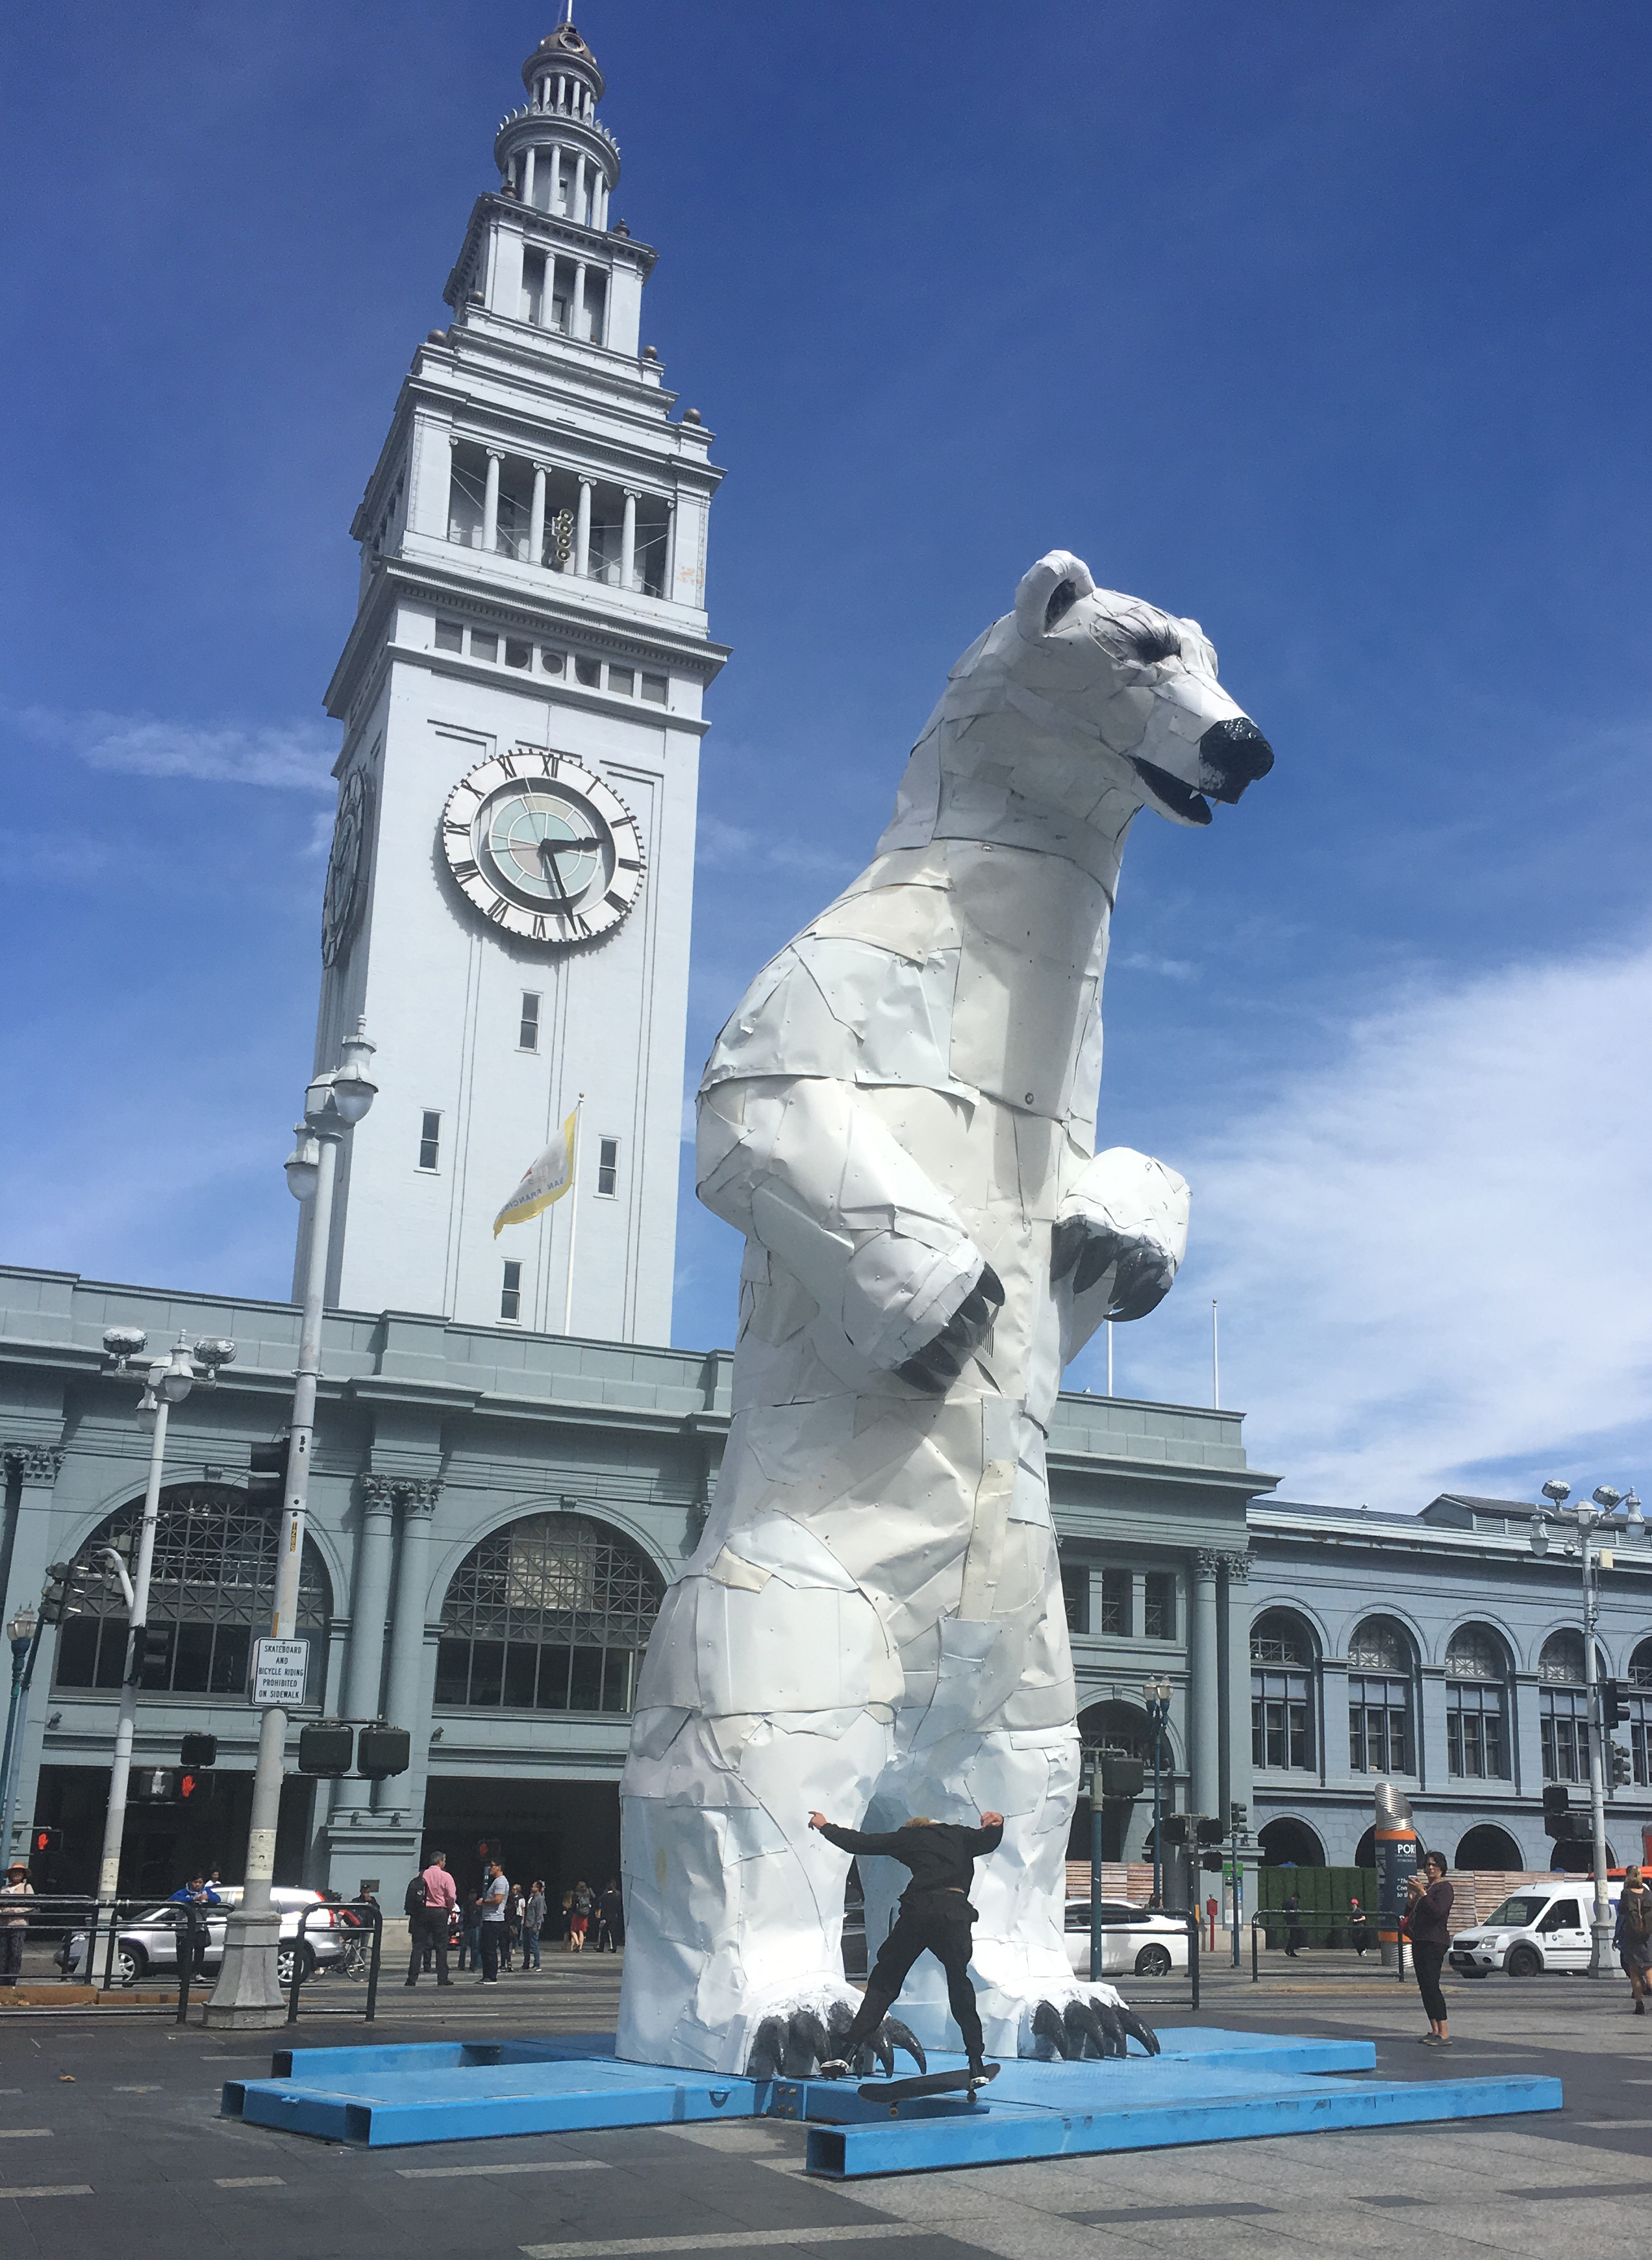 A polar bear made of car parts hosts skateboarder tricks at the San Francisco Ferry Building to mark the Global Climate Action Summit